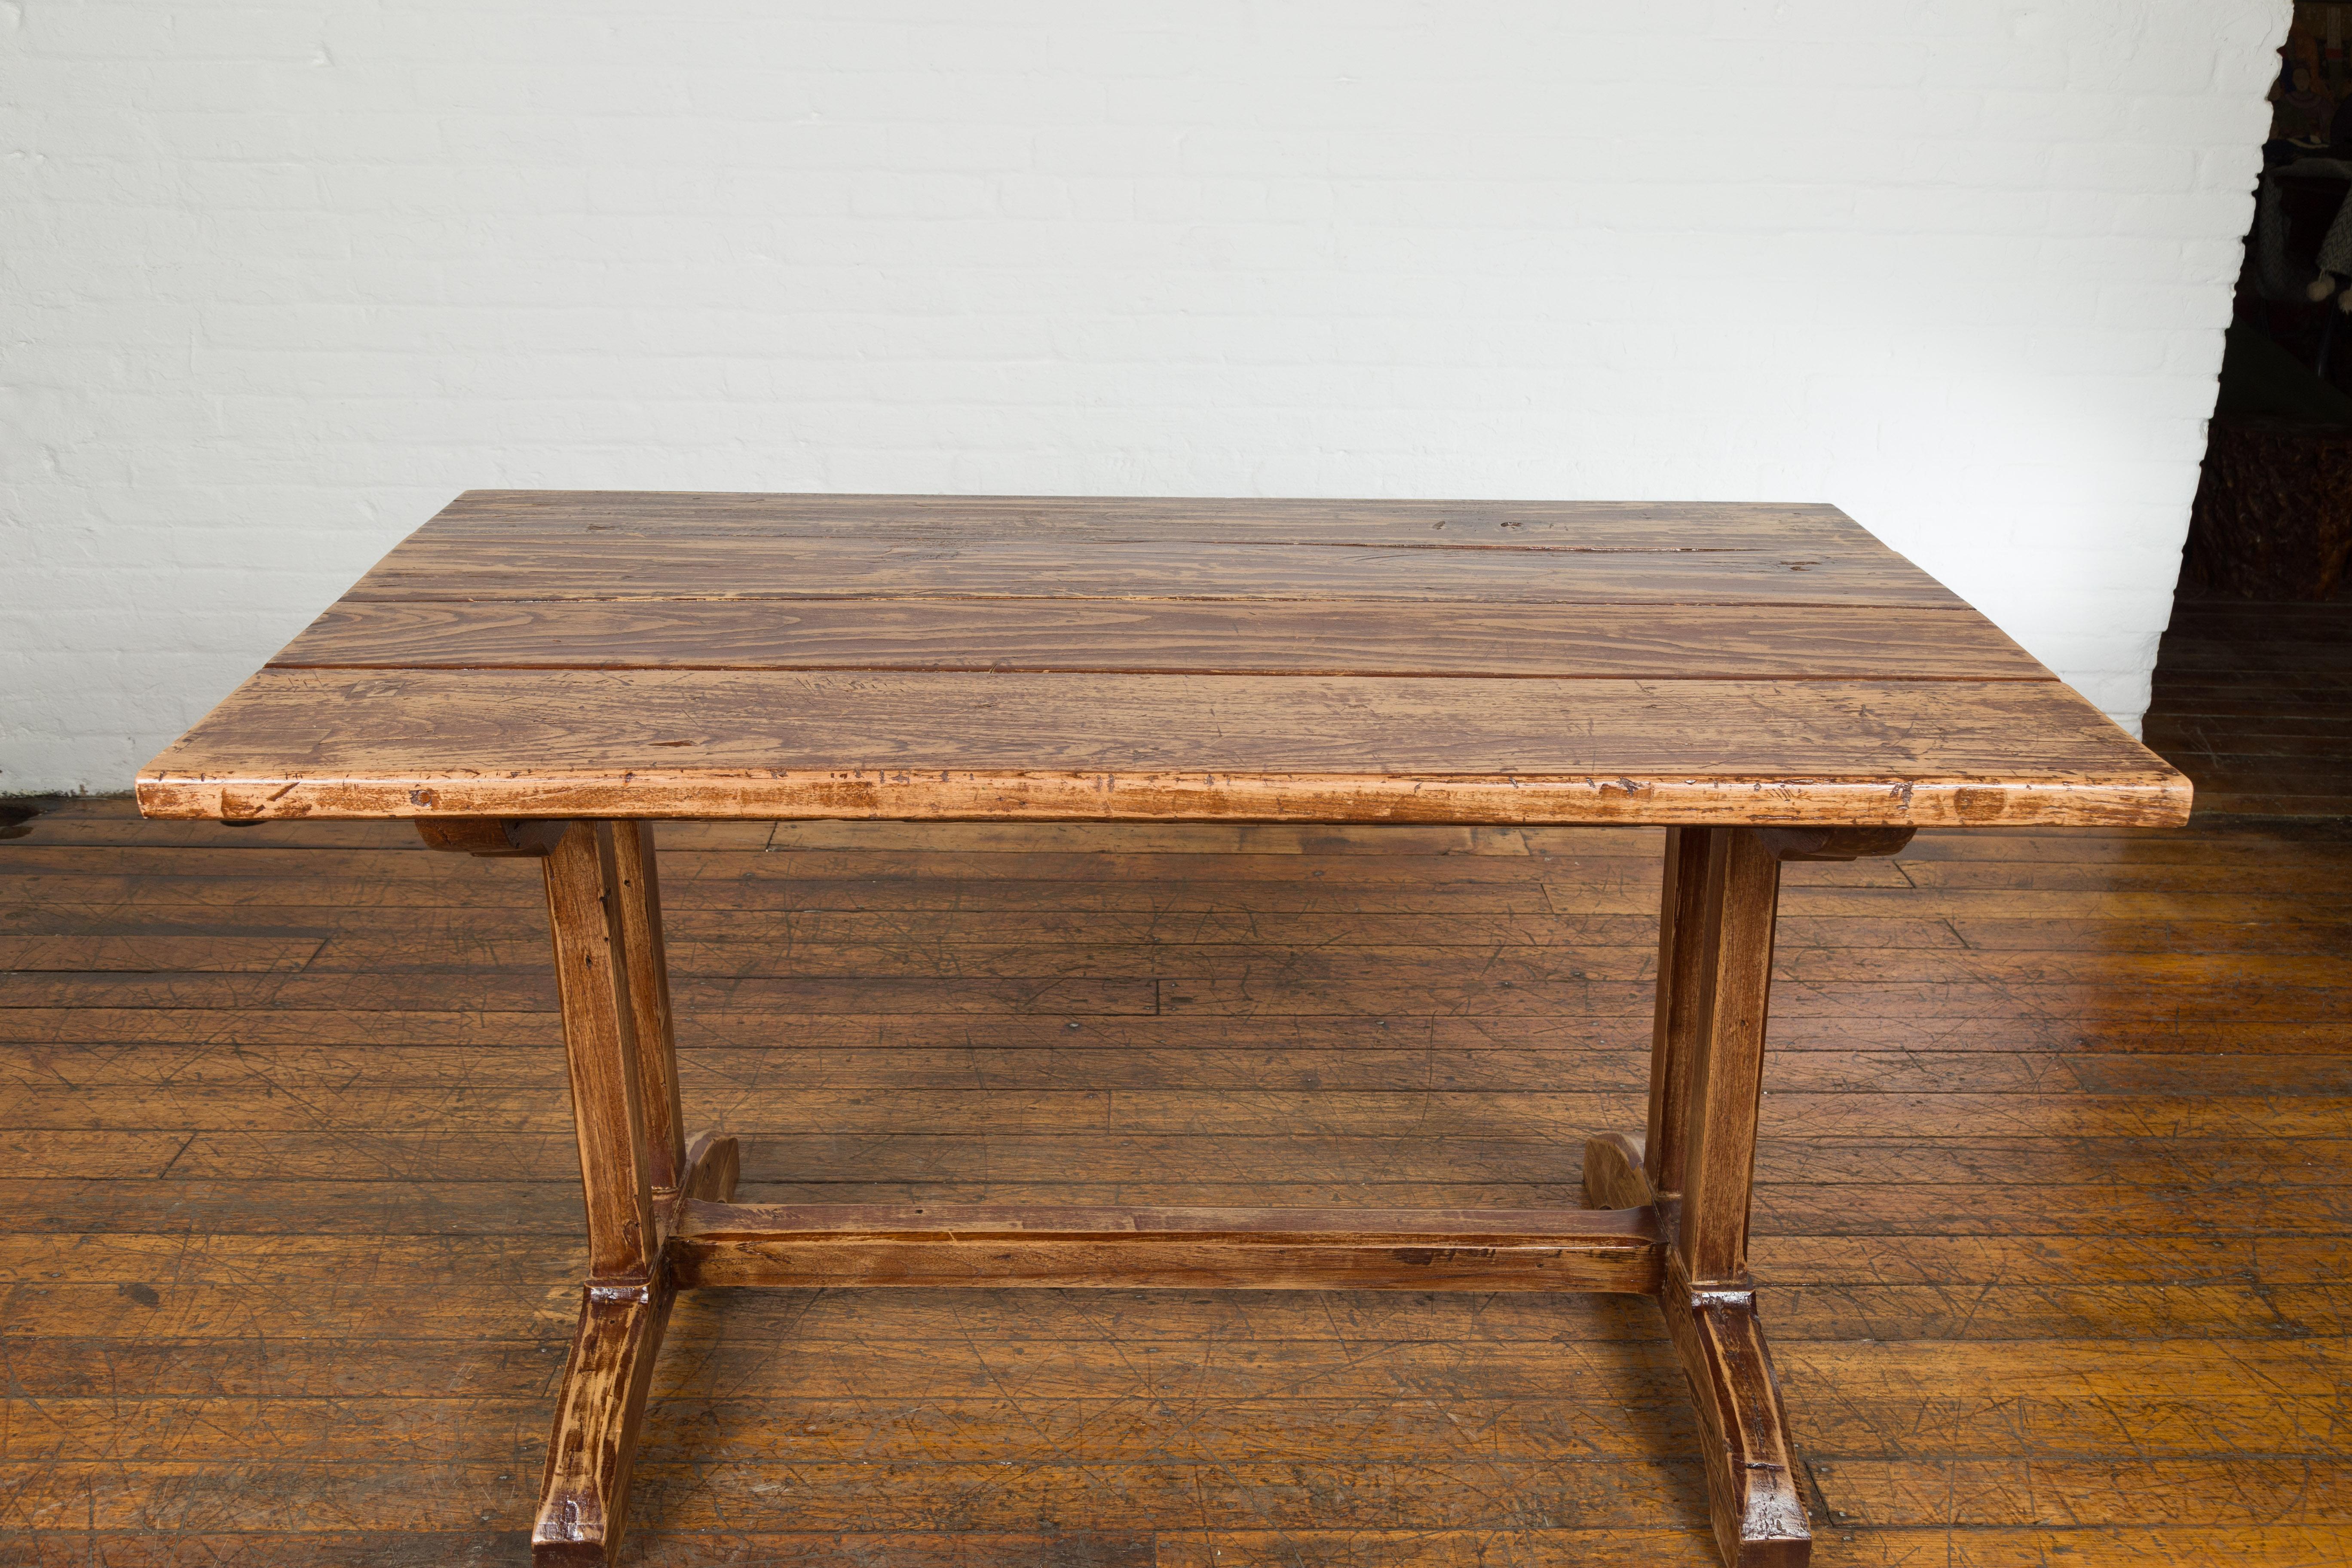 19th Century Country Farmhouse Table with Trestle Base and Distressed Finish In Good Condition For Sale In Yonkers, NY